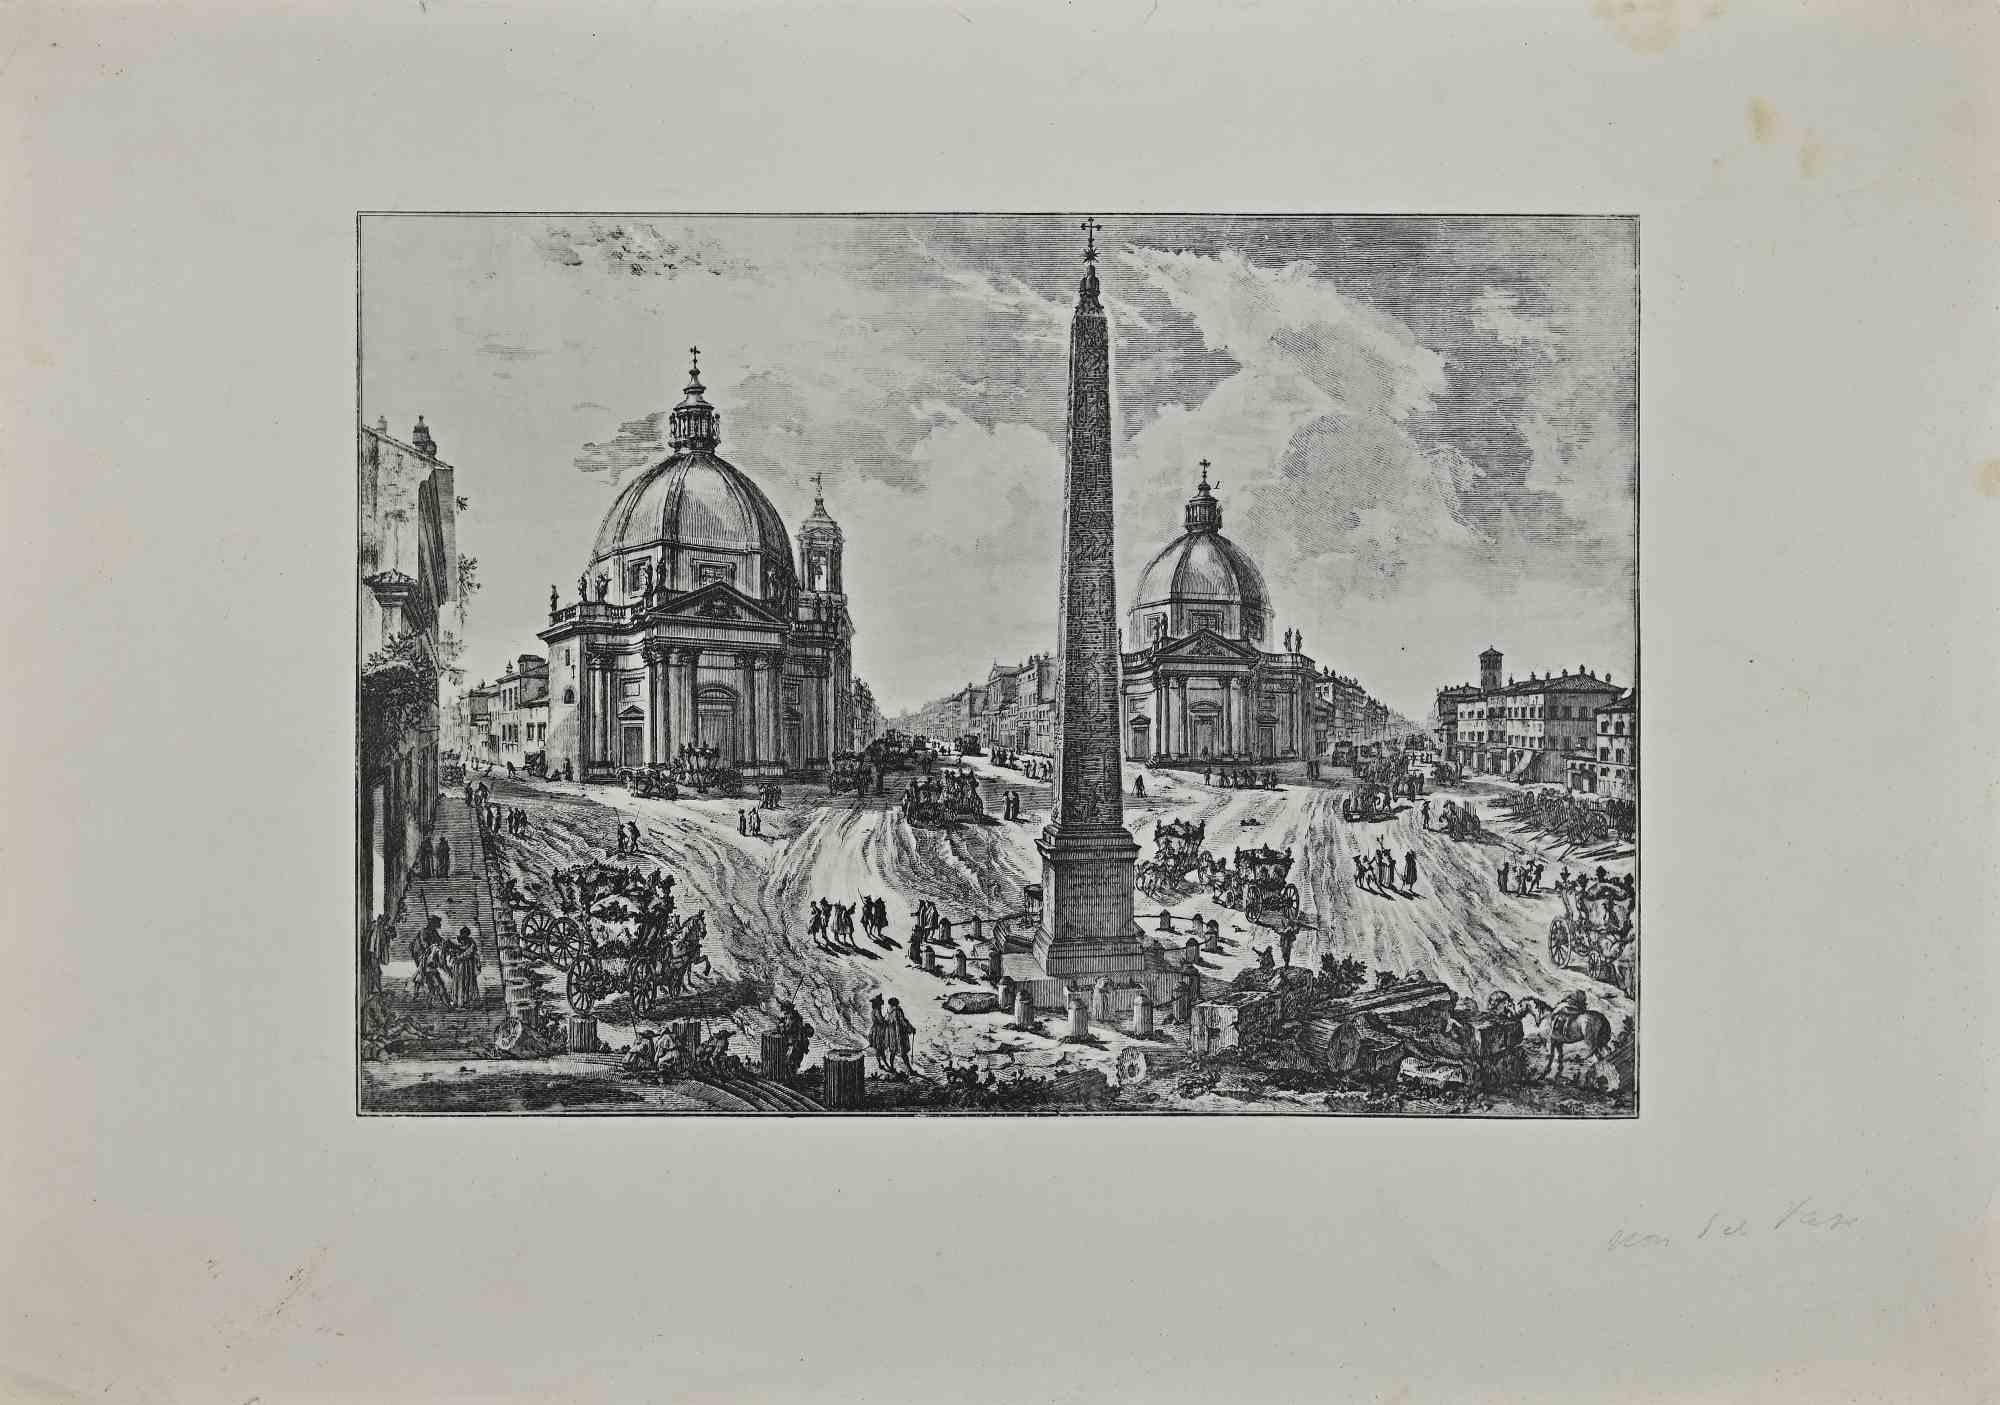 Piazza del Popolo is a vintage offset print realized after Giuseppe Vasi in the early 20th Century.

Good conditions and aged margins with some foxings.

Giuseppe Vasi  (Corleone,1710 - Rome, 1782) was an engraver, architect, and landscape artist.